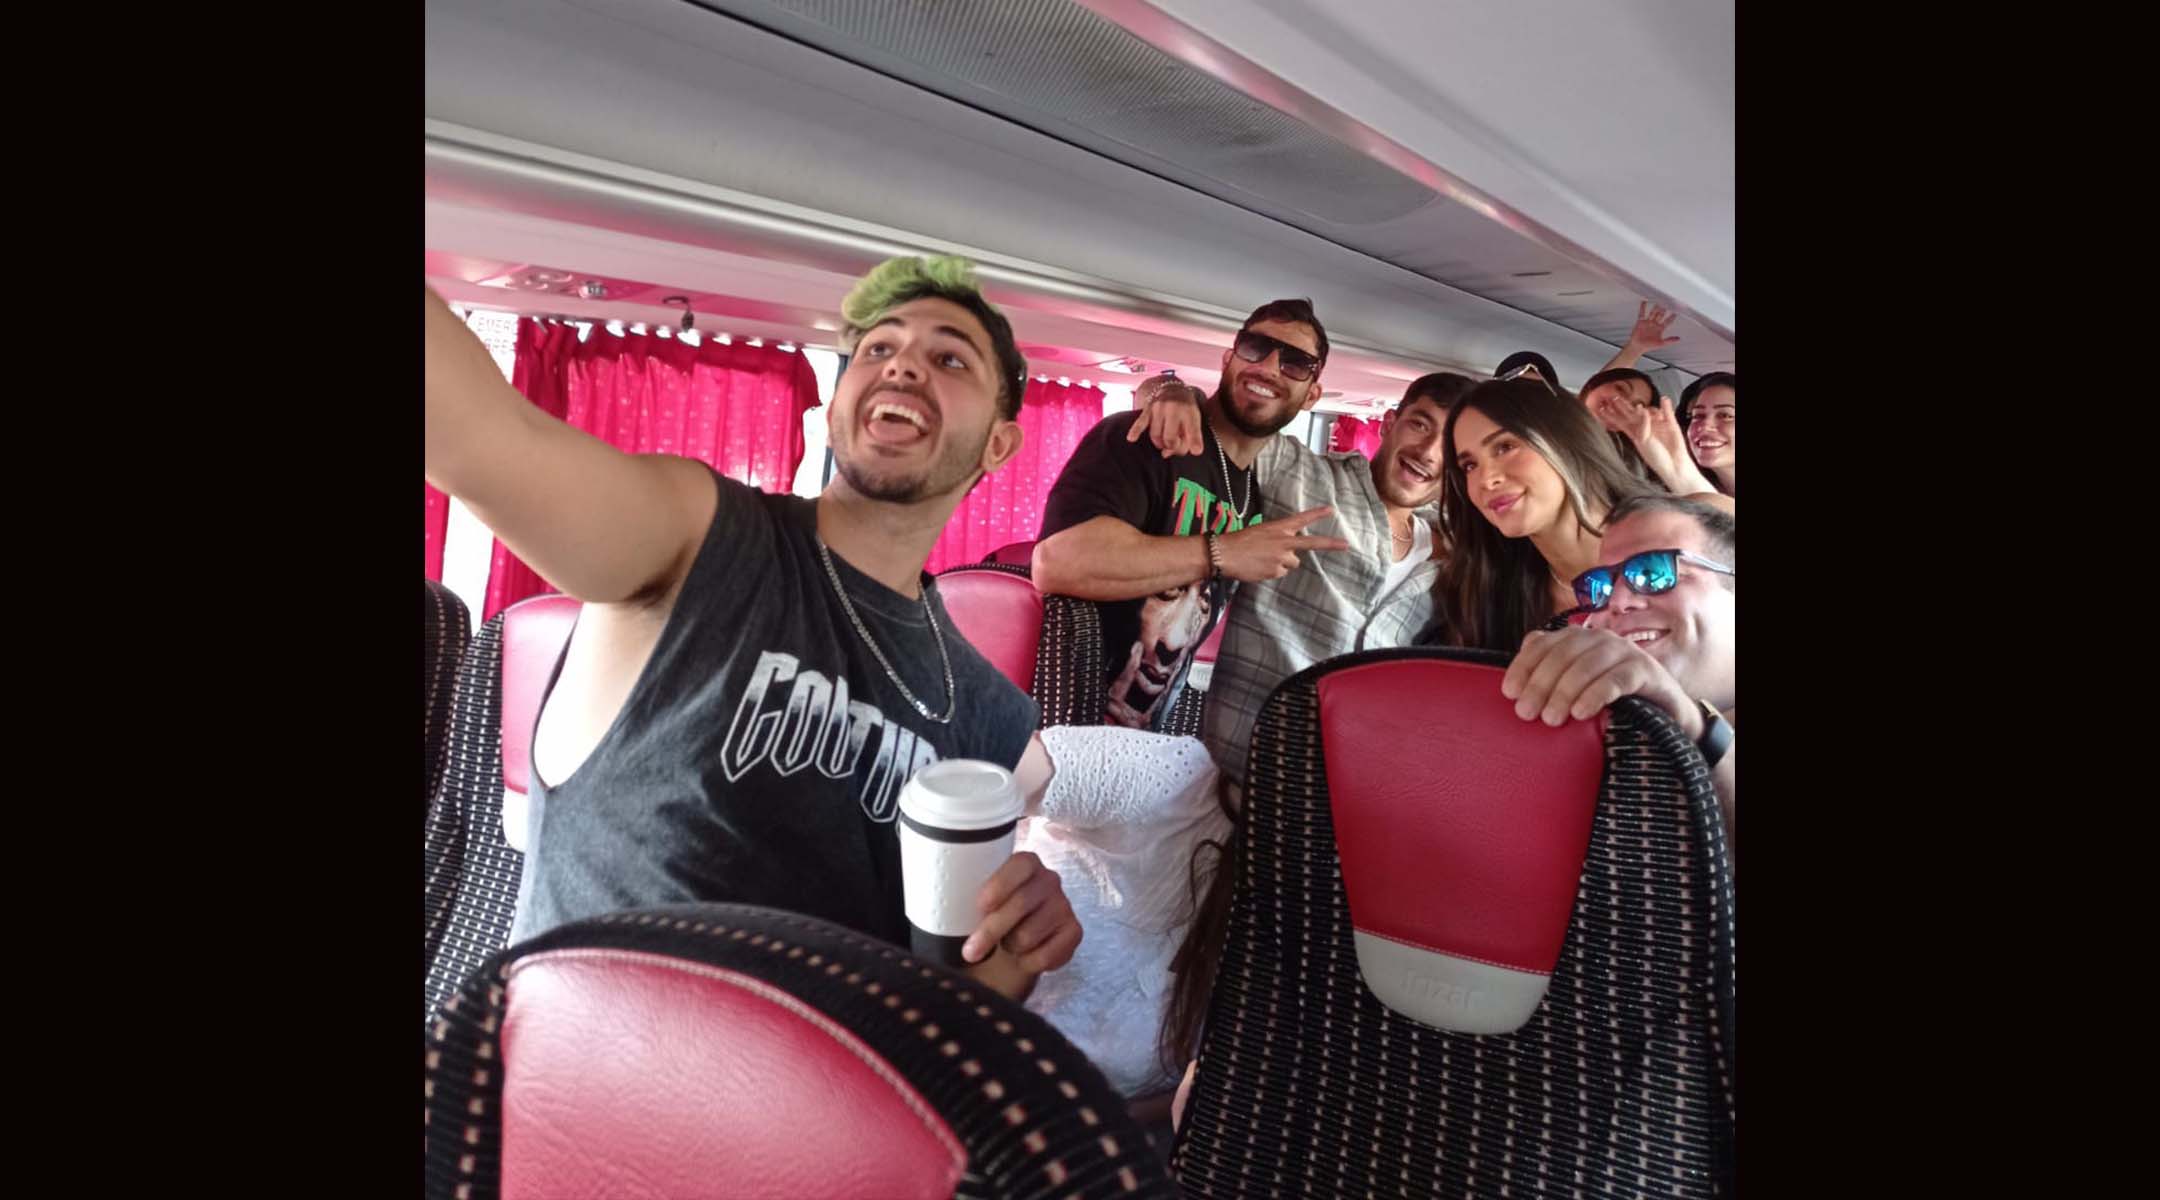 Sixteen young social media influencers, whose combined following reaches 32 million users worldwide, joined forces on a bus trip to northern Israel, Jun. 22, 2022. (Deborah Danan)